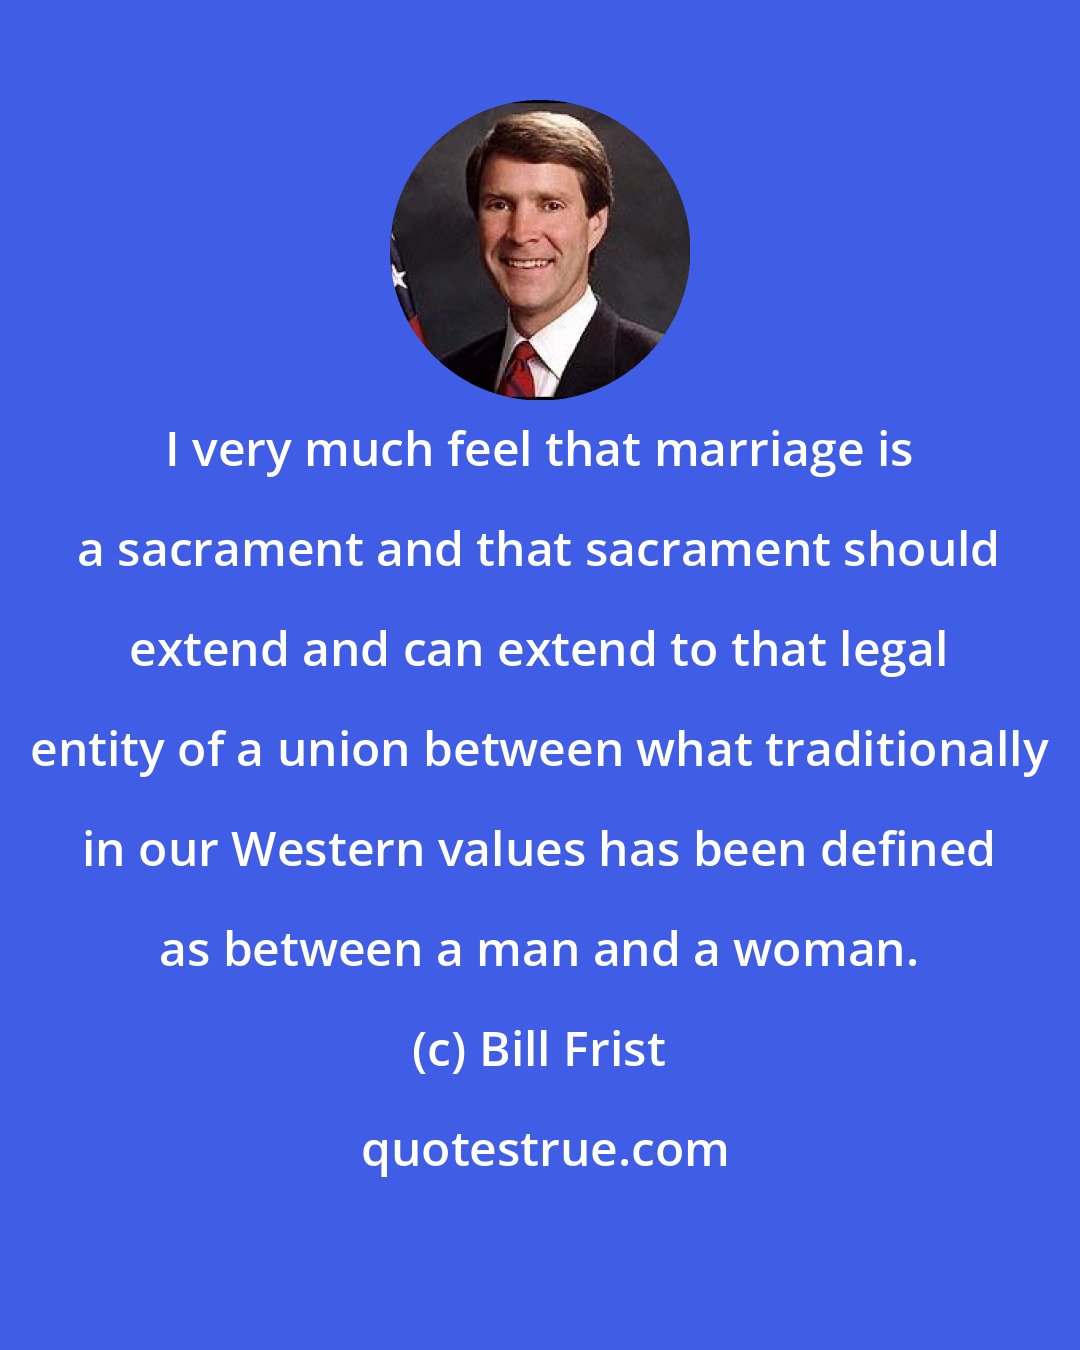 Bill Frist: I very much feel that marriage is a sacrament and that sacrament should extend and can extend to that legal entity of a union between what traditionally in our Western values has been defined as between a man and a woman.